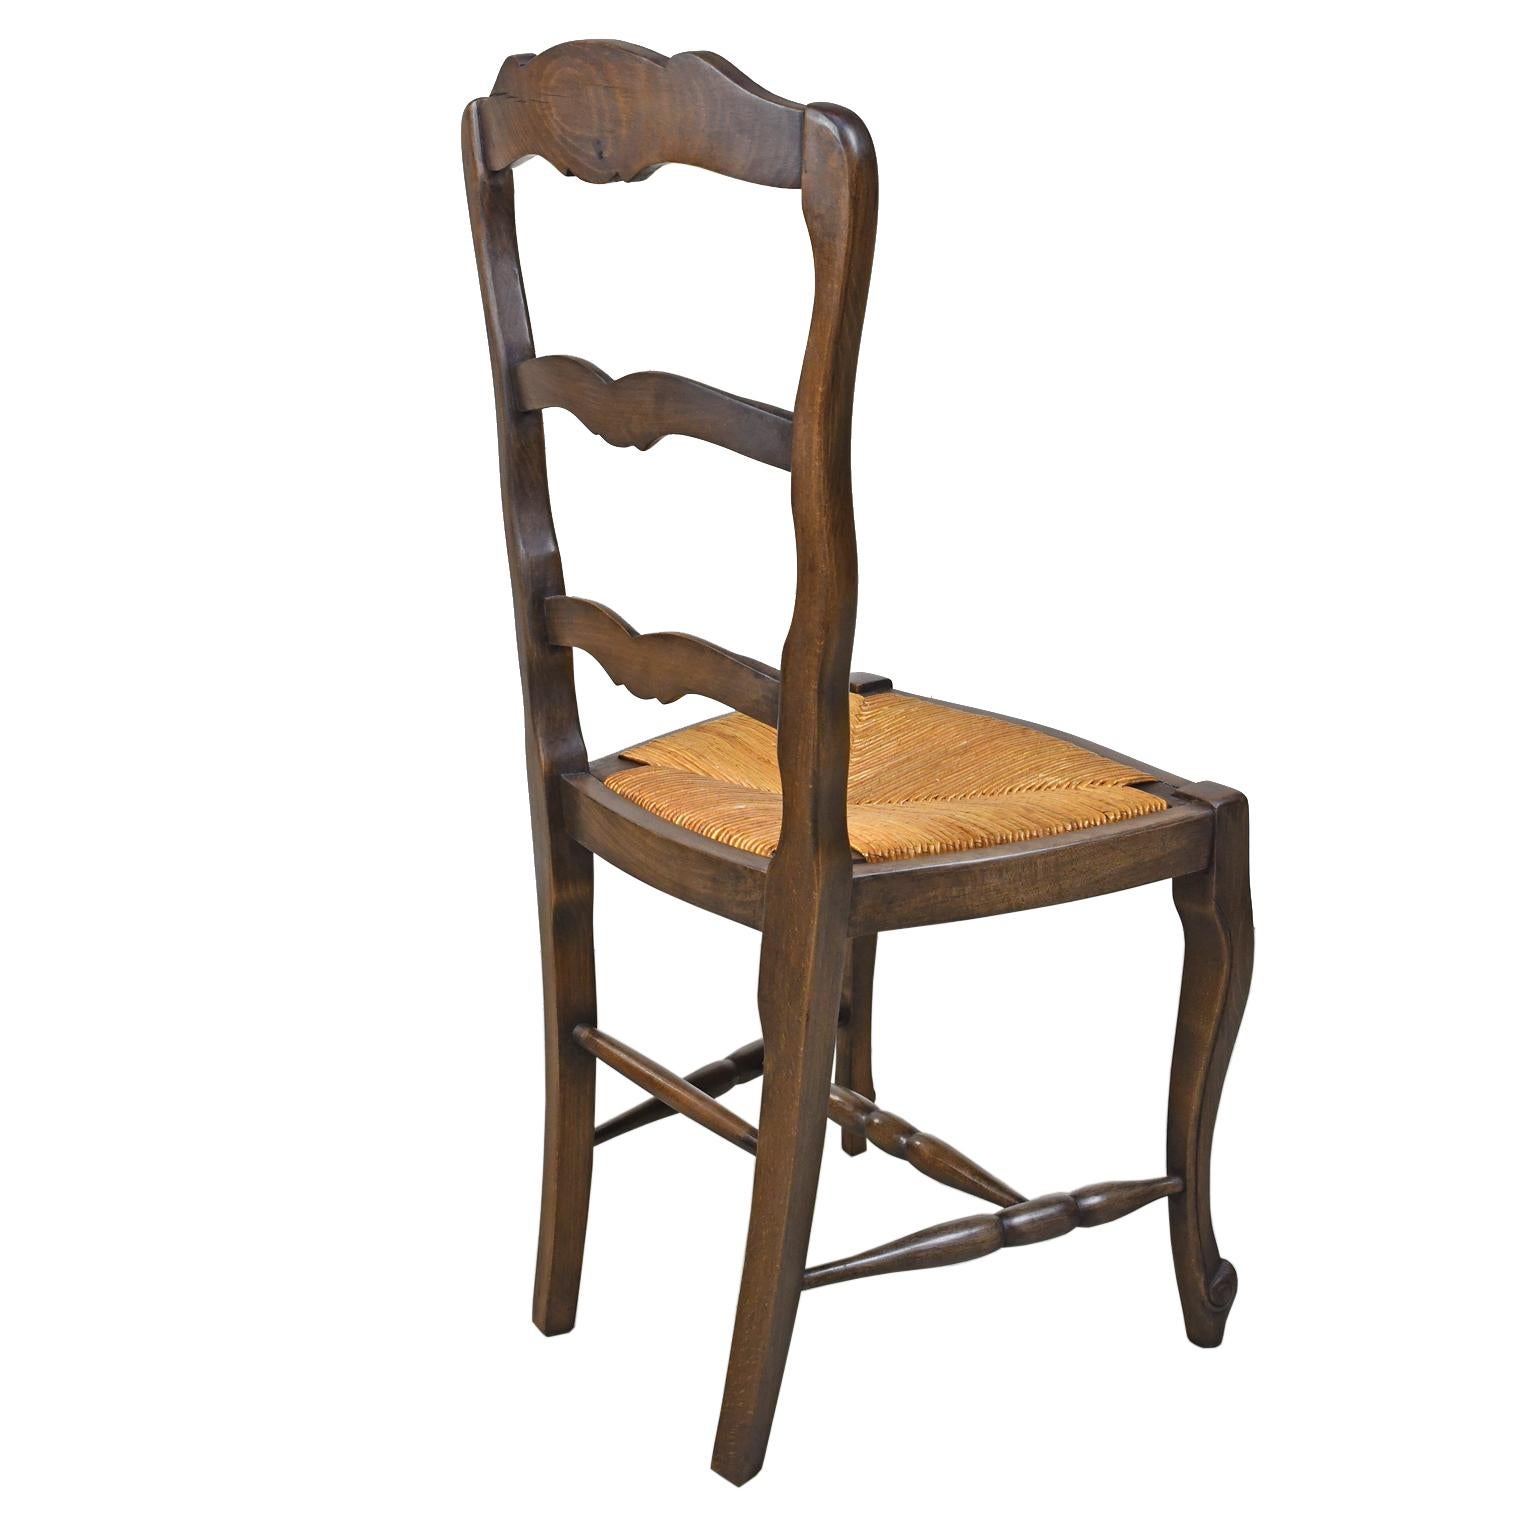 Rush Set of 6 Provincial French Ladder Back Chairs, in Walnut Finish, circa 1900-1920